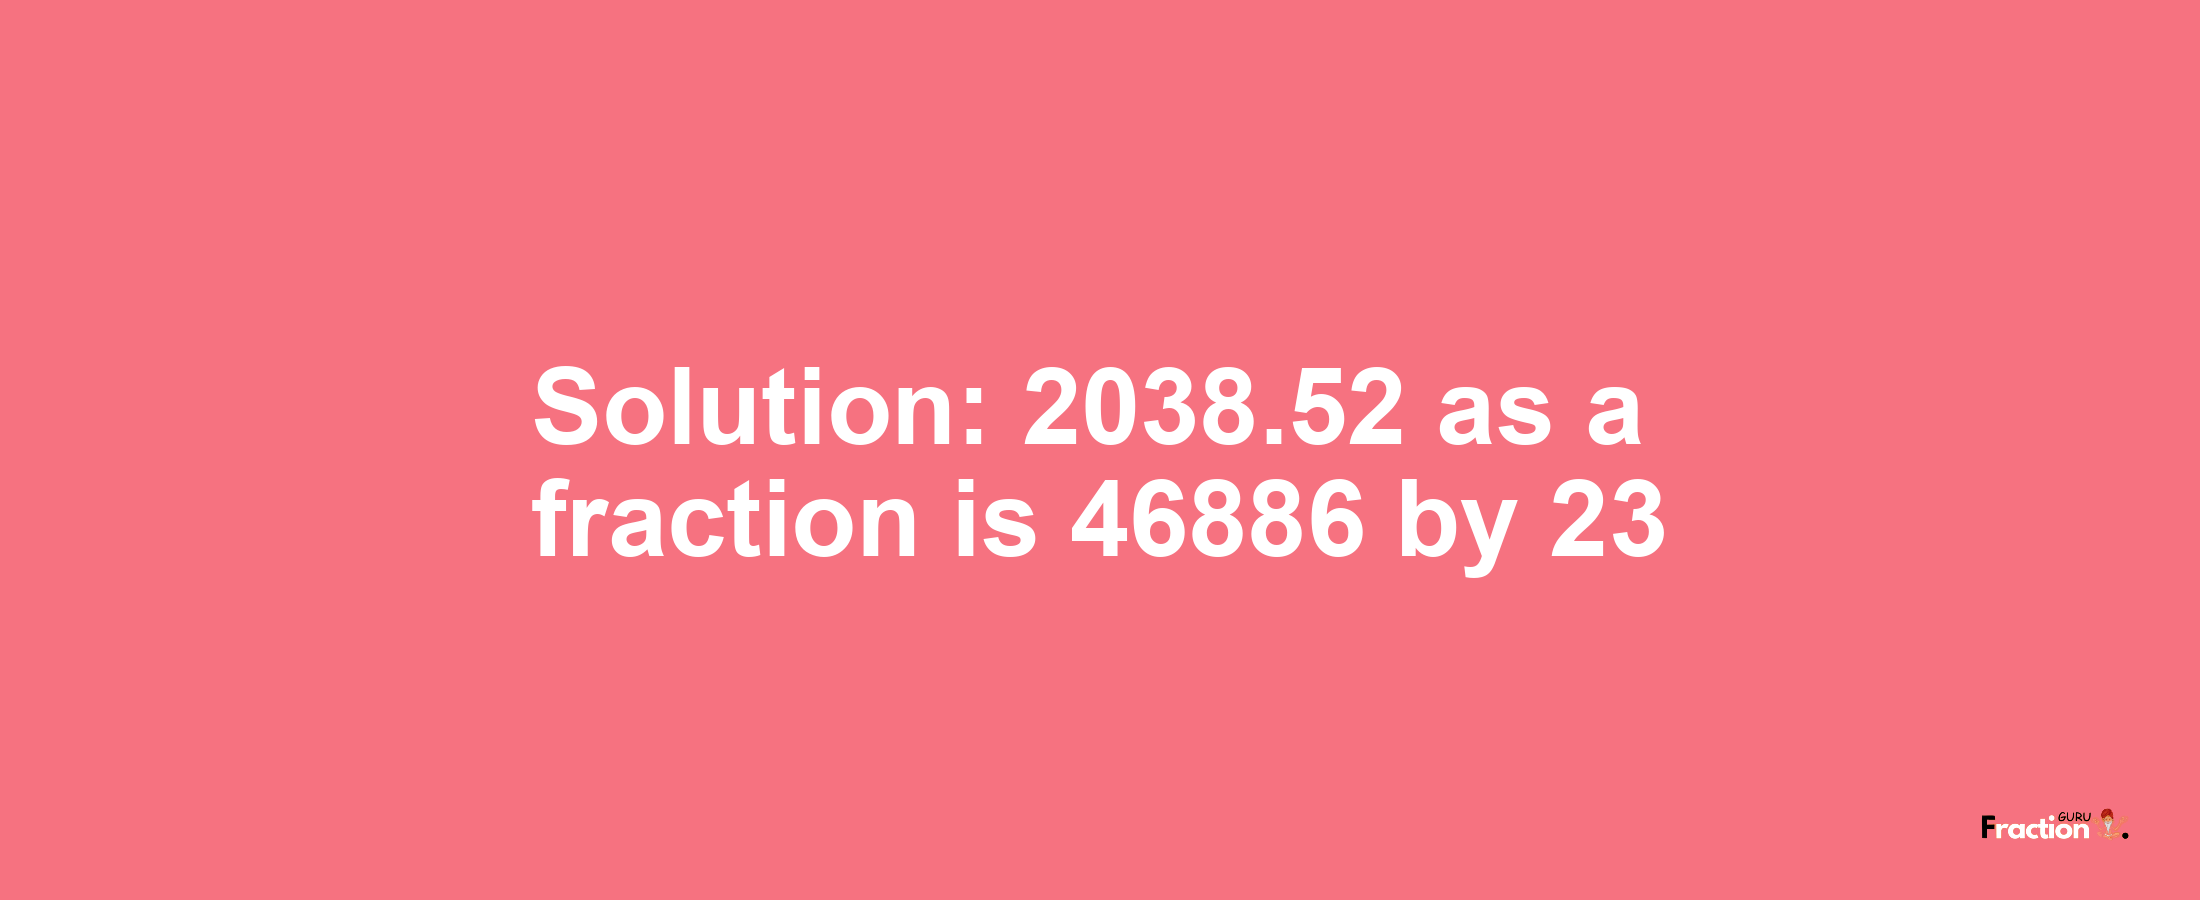 Solution:2038.52 as a fraction is 46886/23